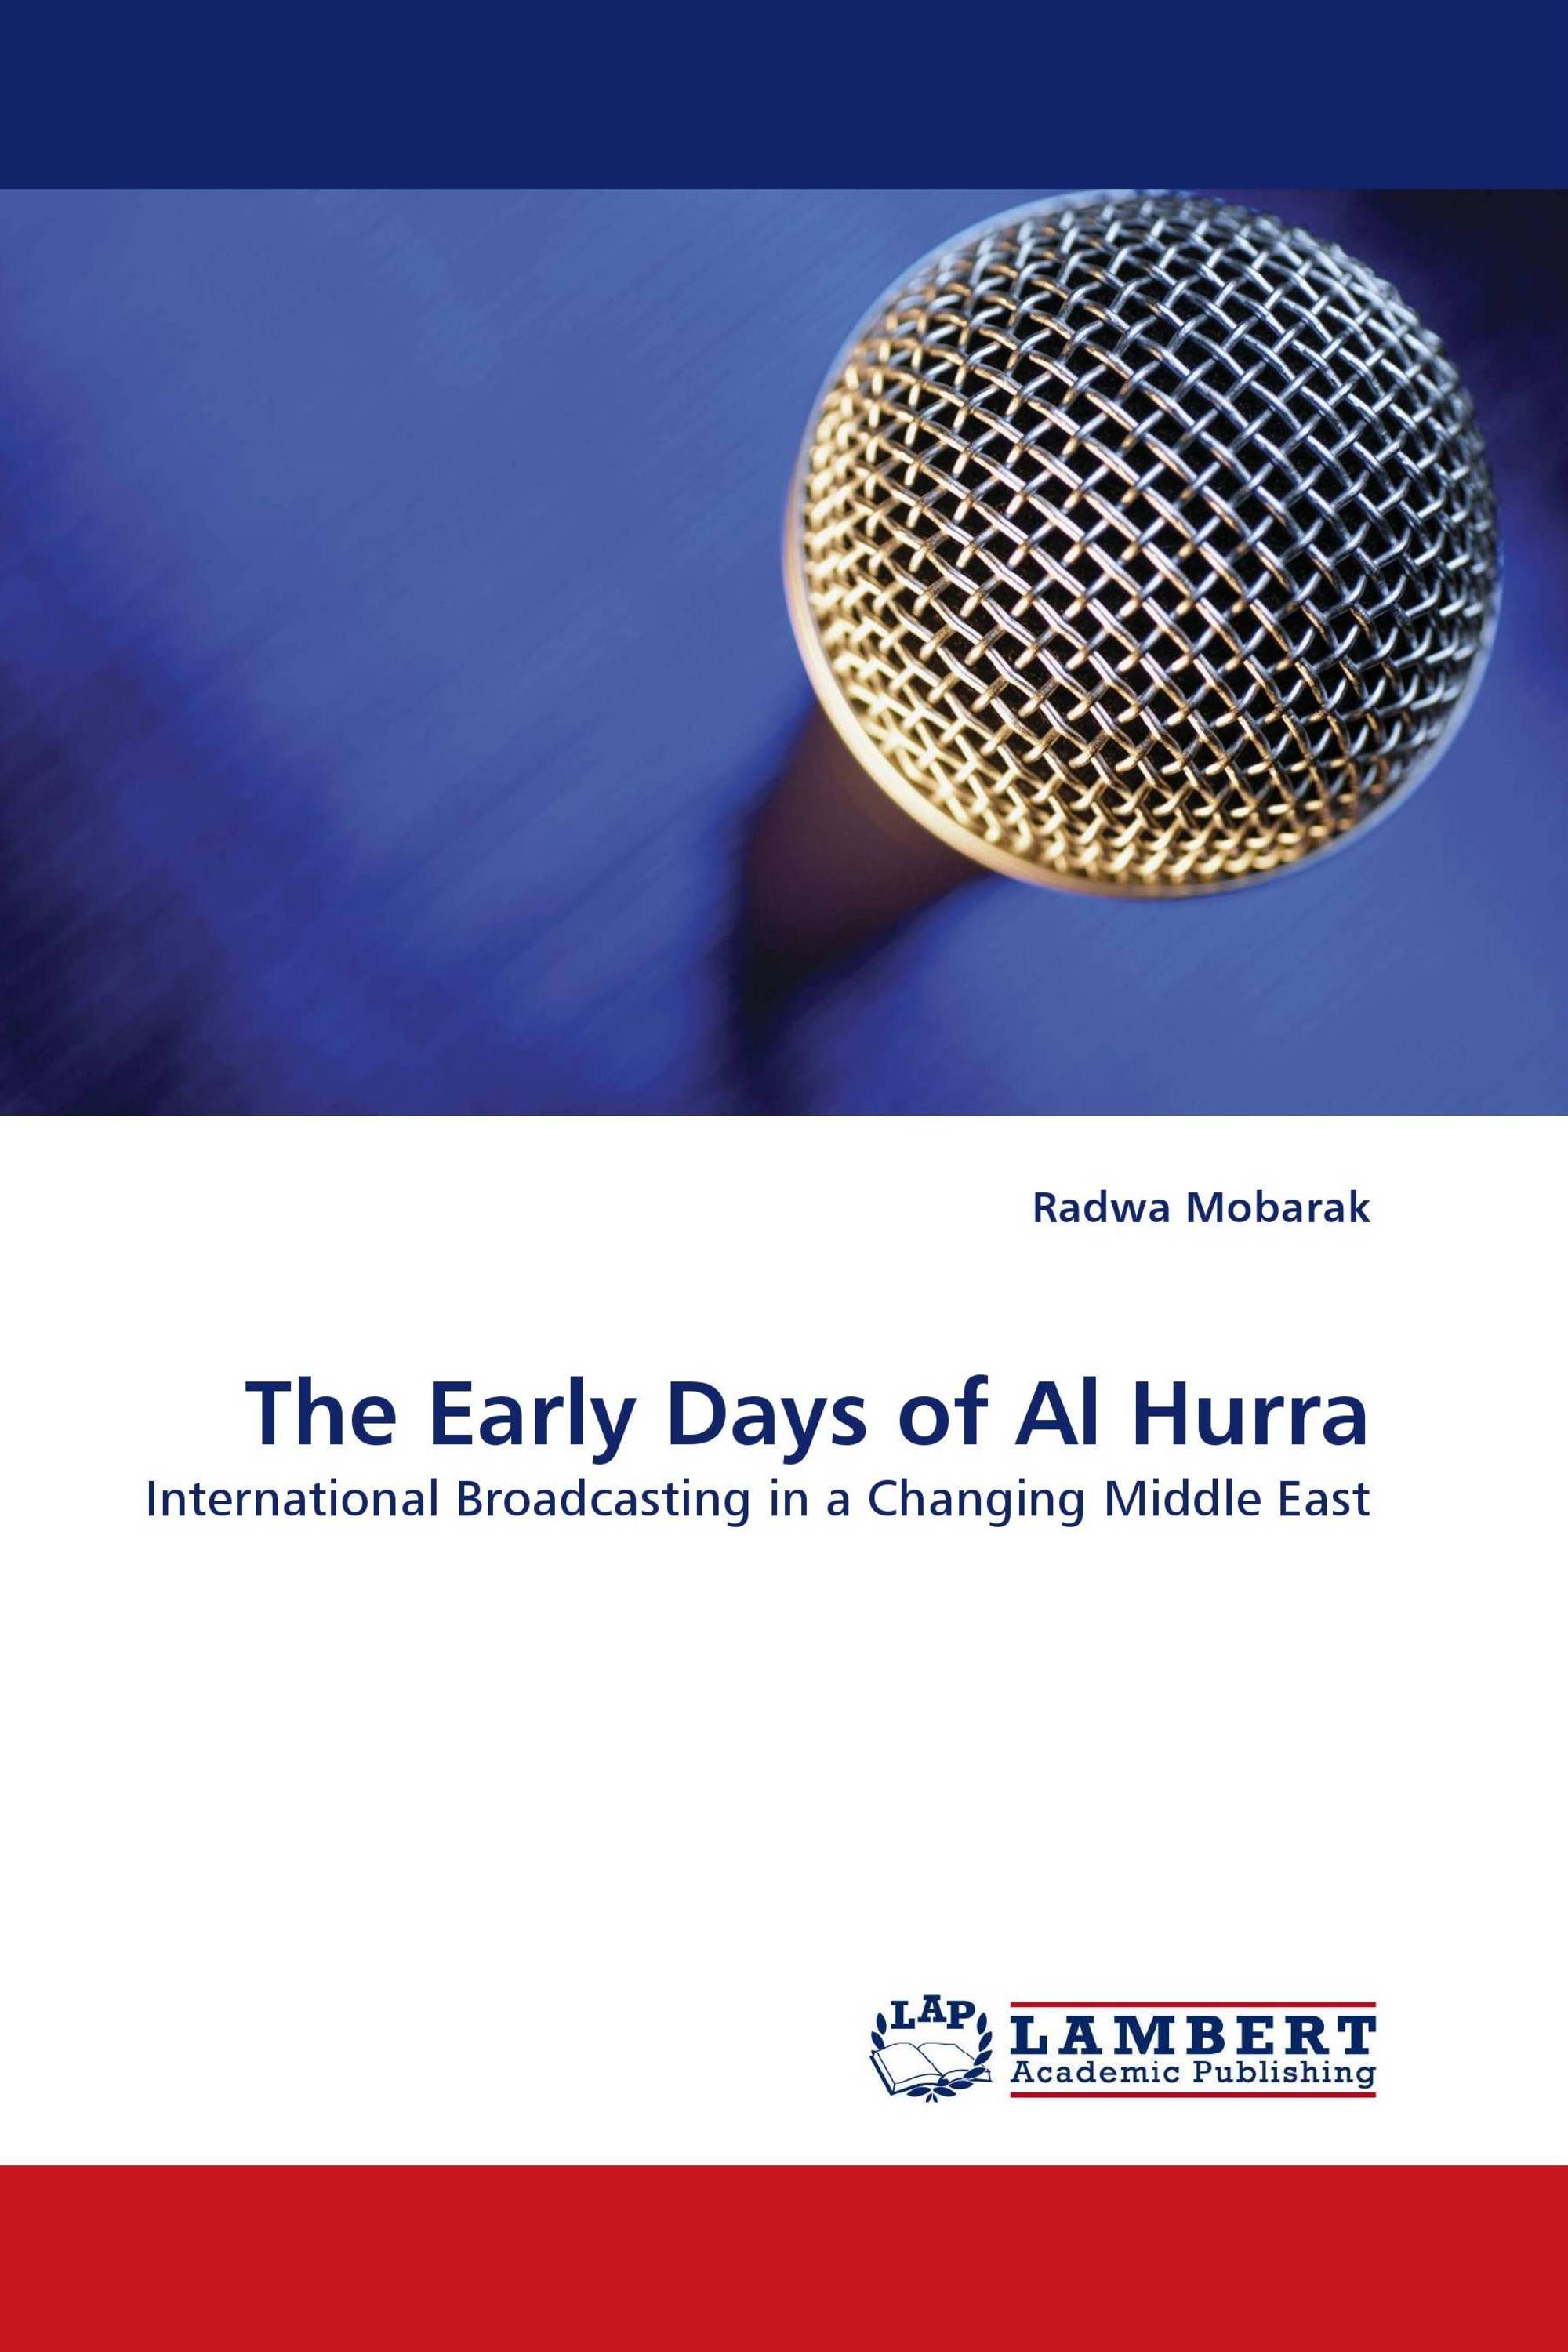 The Early Days of Al Hurra